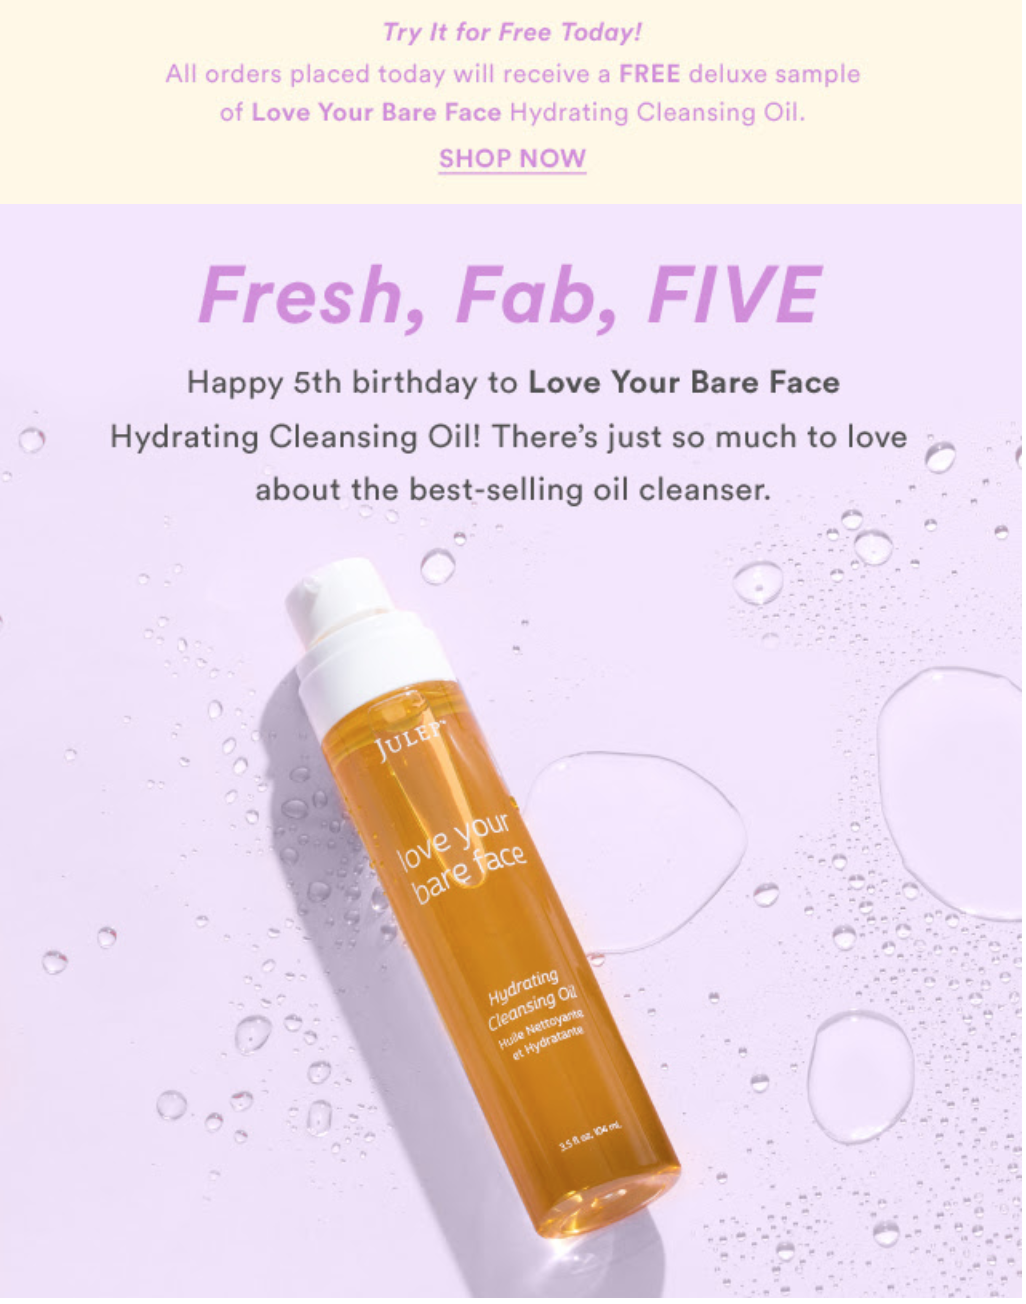 Today Only! Free Cleansing Oil Deluxe Sample with Any $25 Julep Purchase!